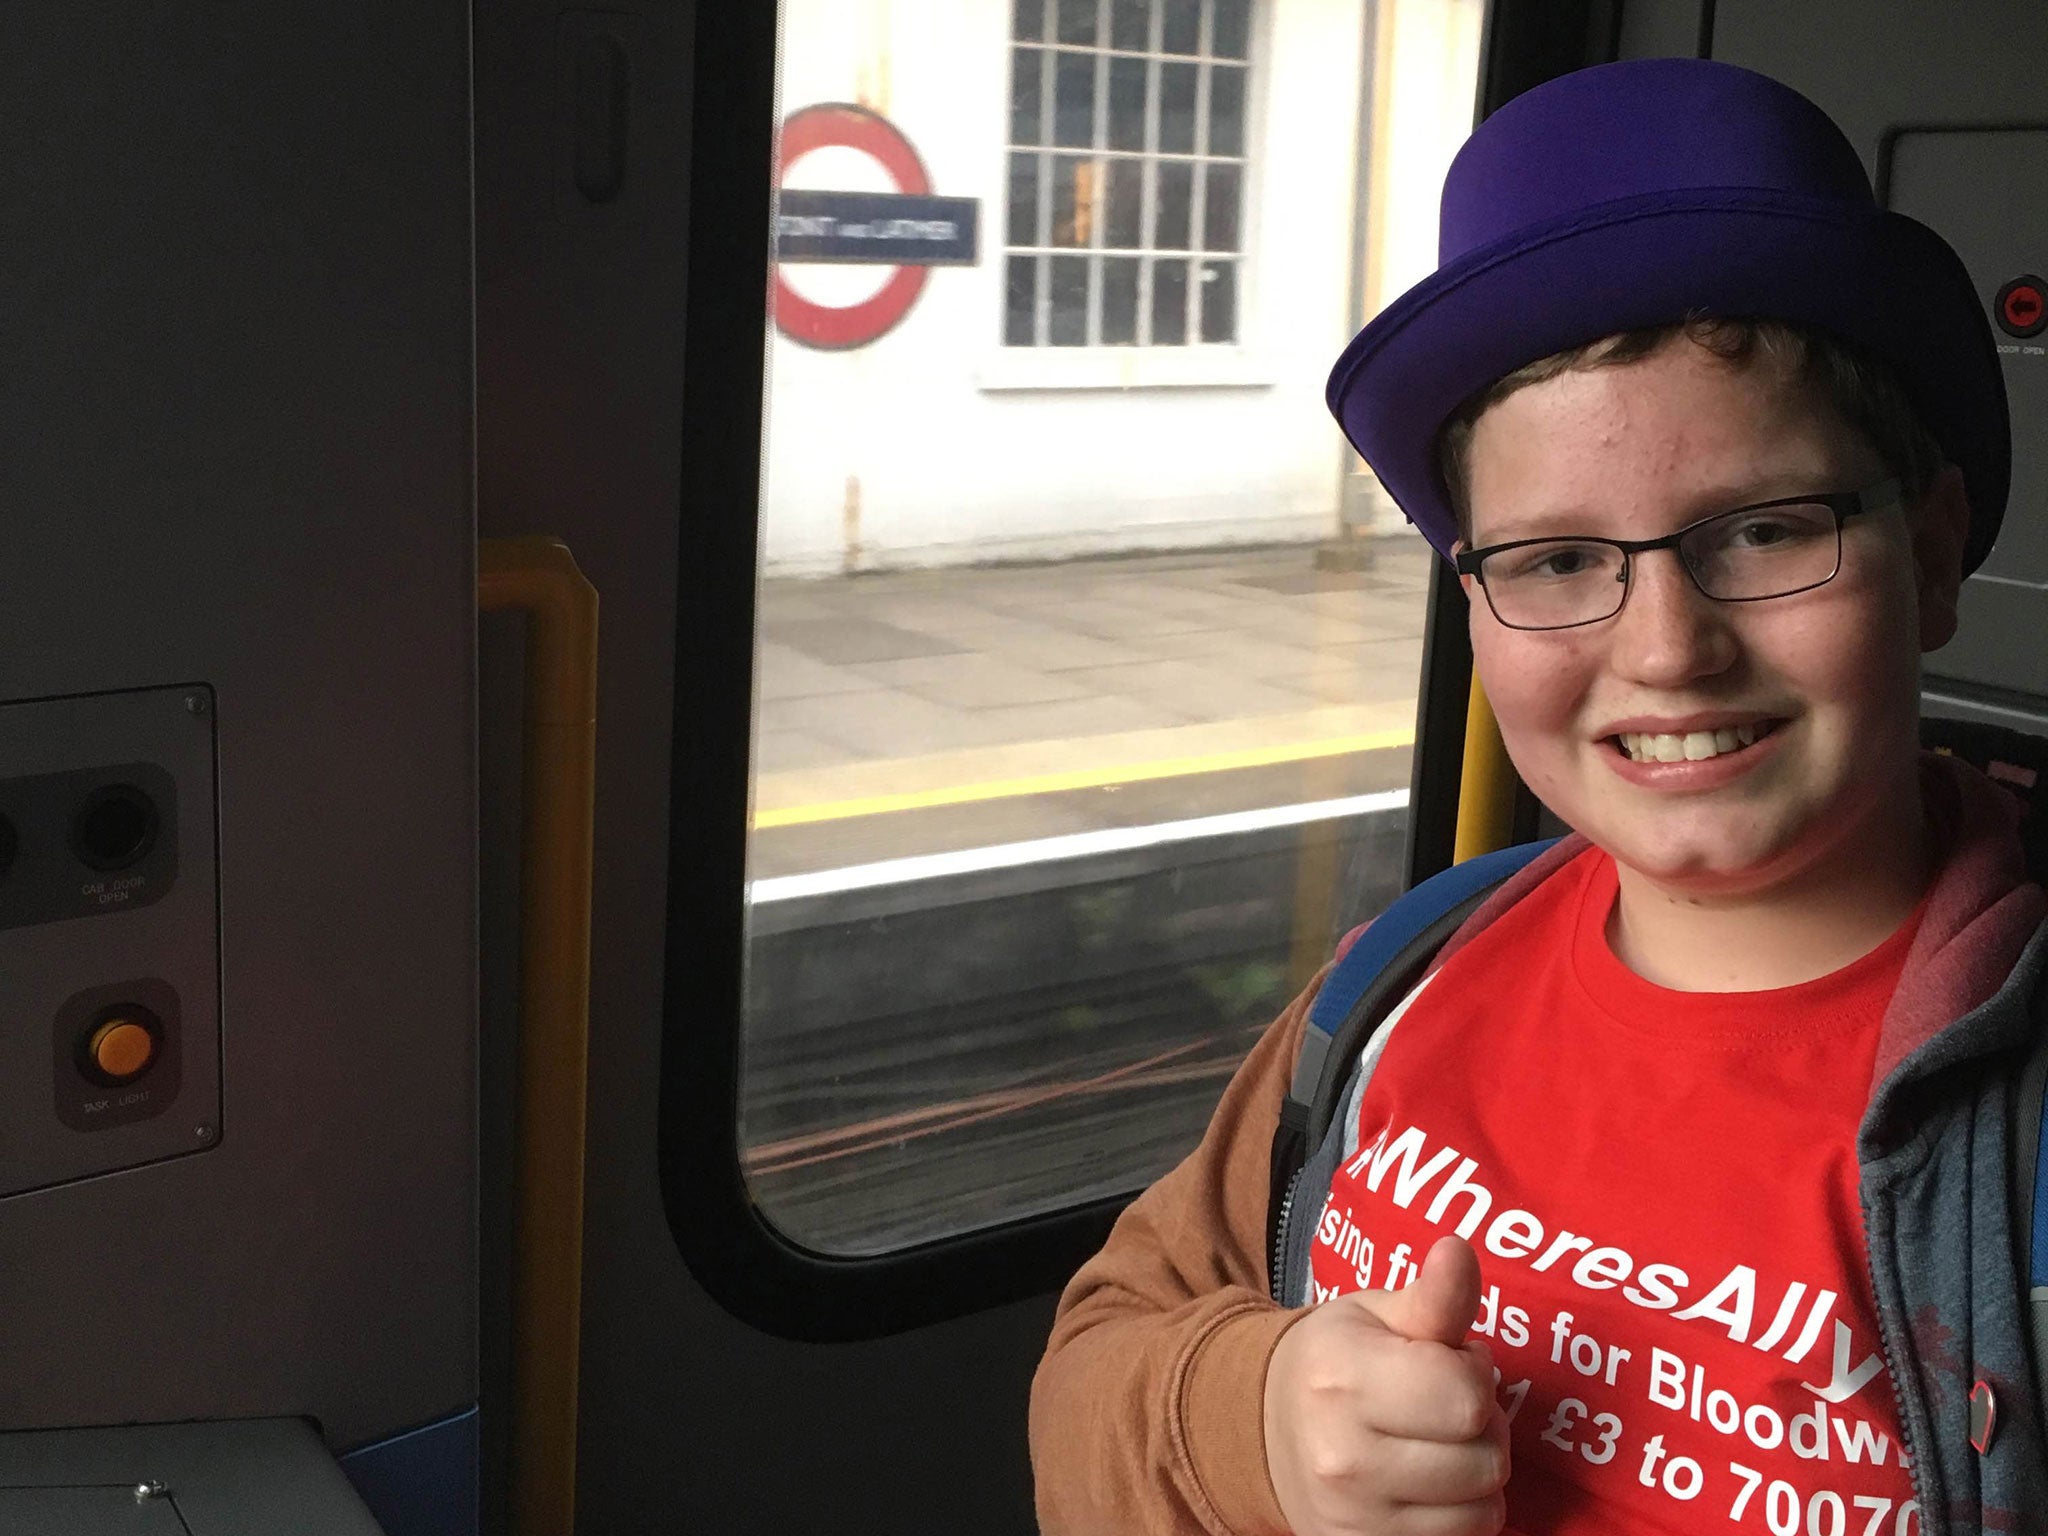 Alasdair Clift, 13, completed the challenge in memory of his older brother, who died from lymphoma in March.